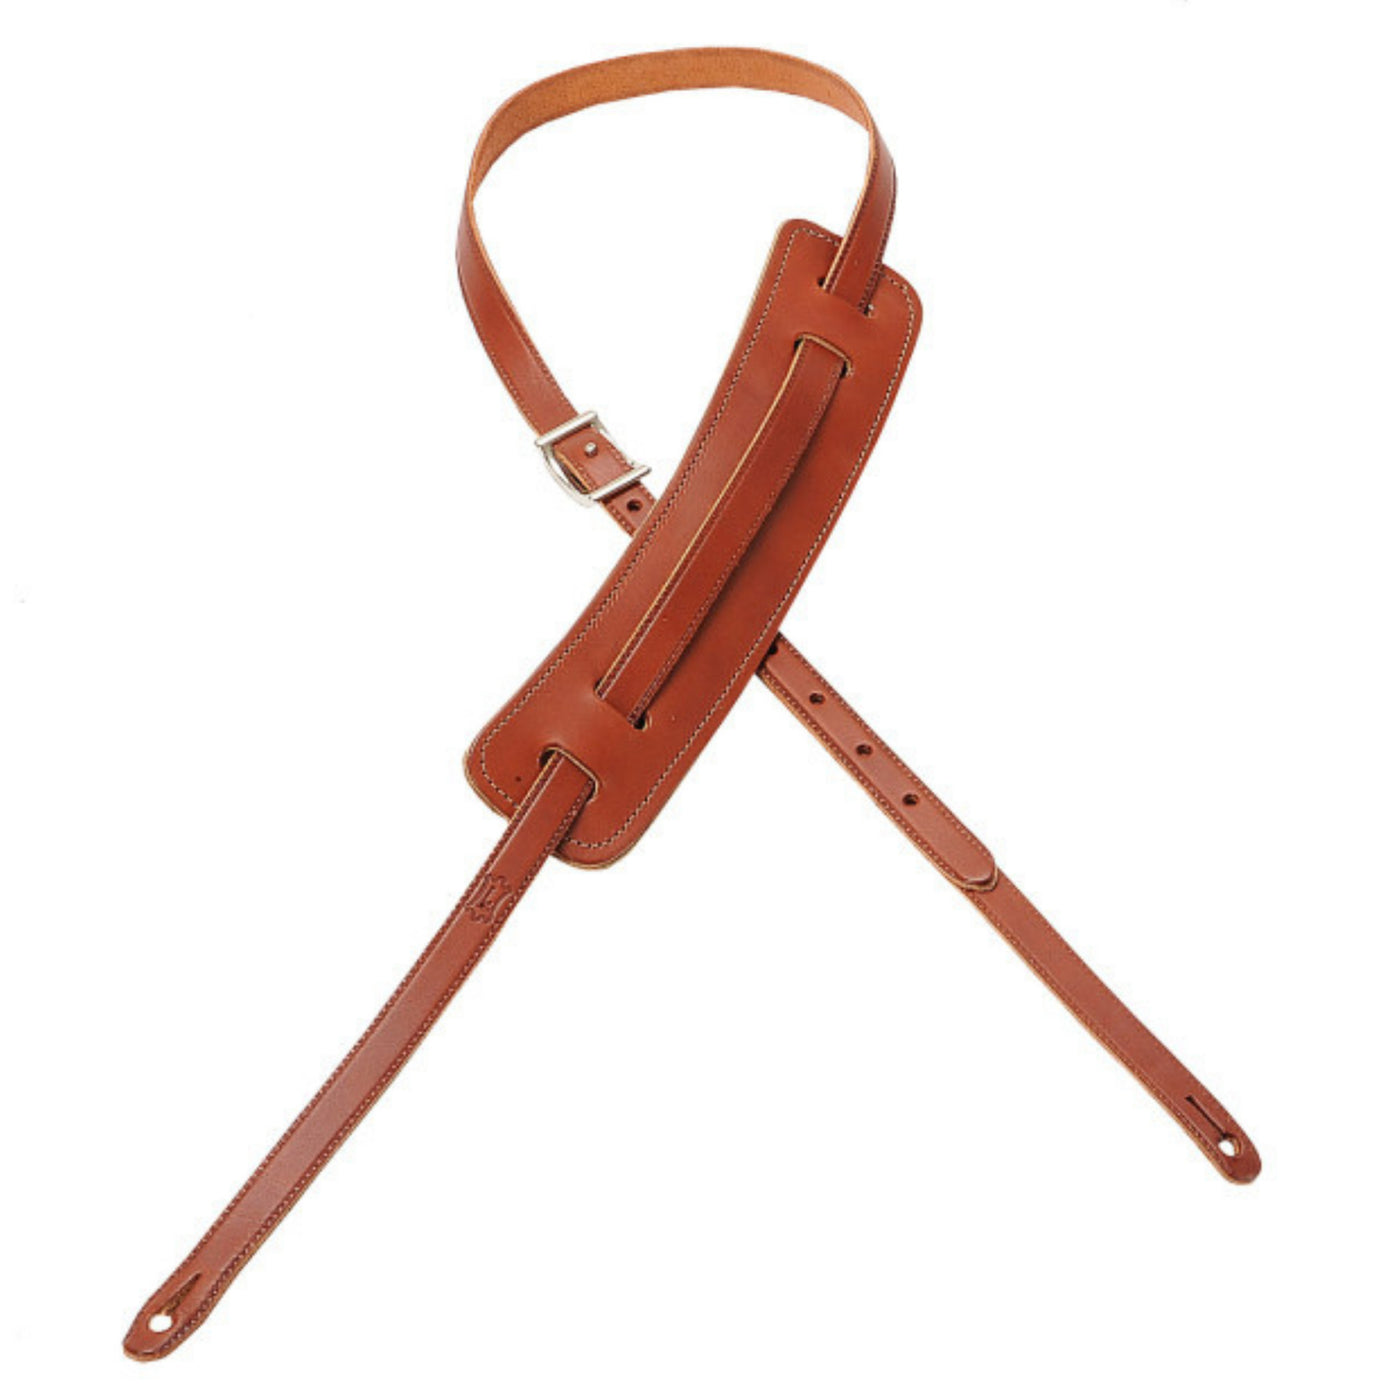 Levy's 5/8" 50's-Style Strap with Pad And Buckle in Walnut